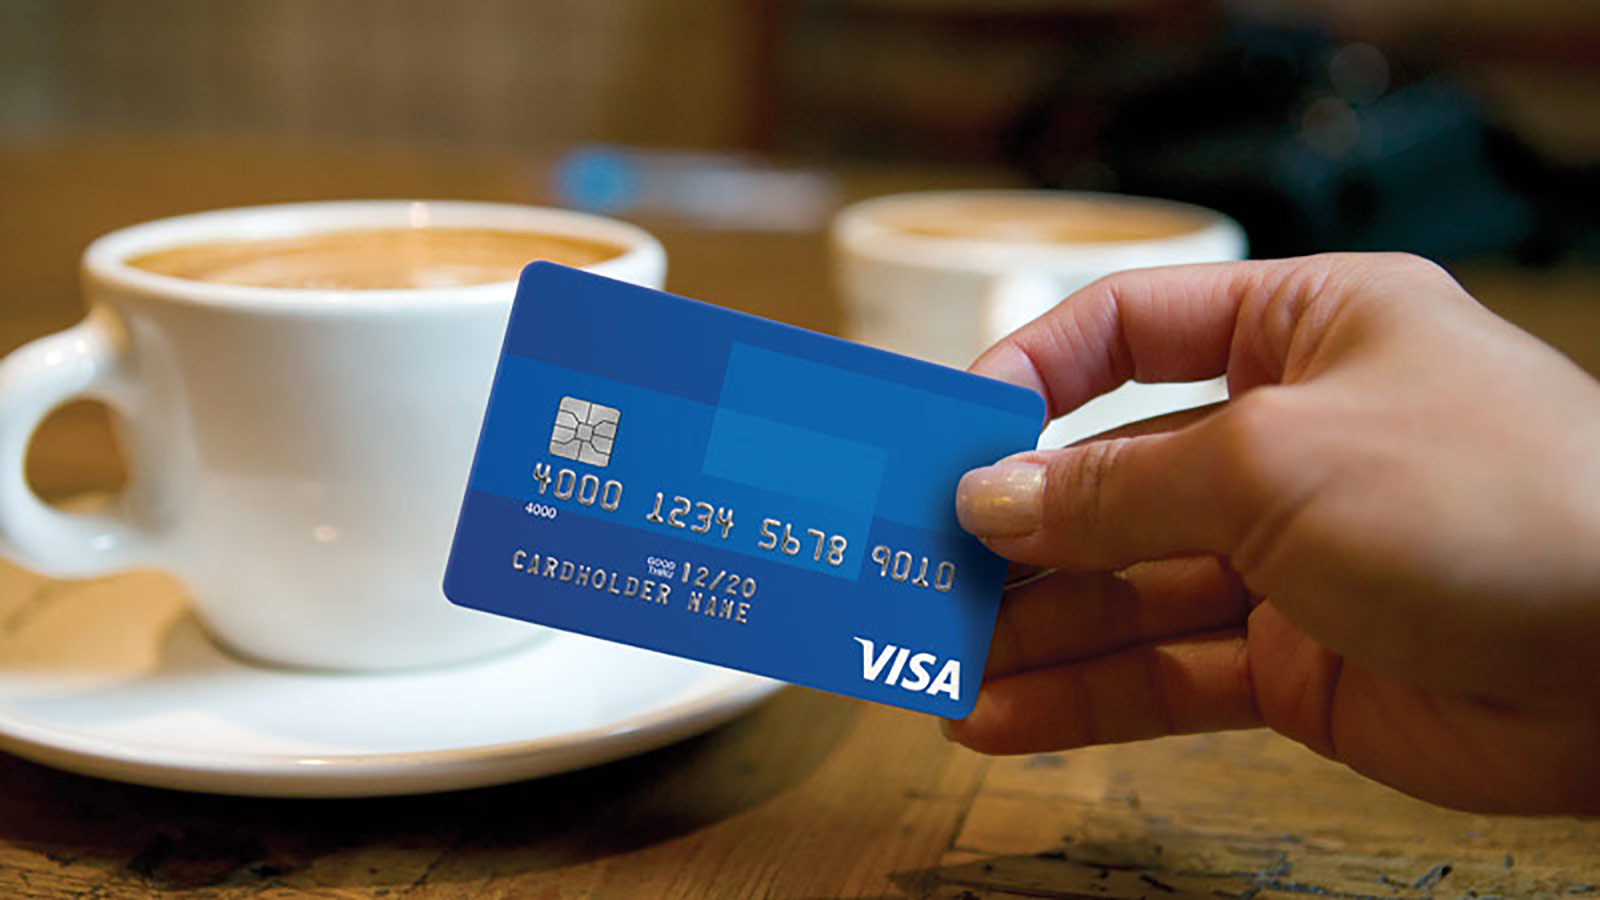 two coffees and woman holding credit card